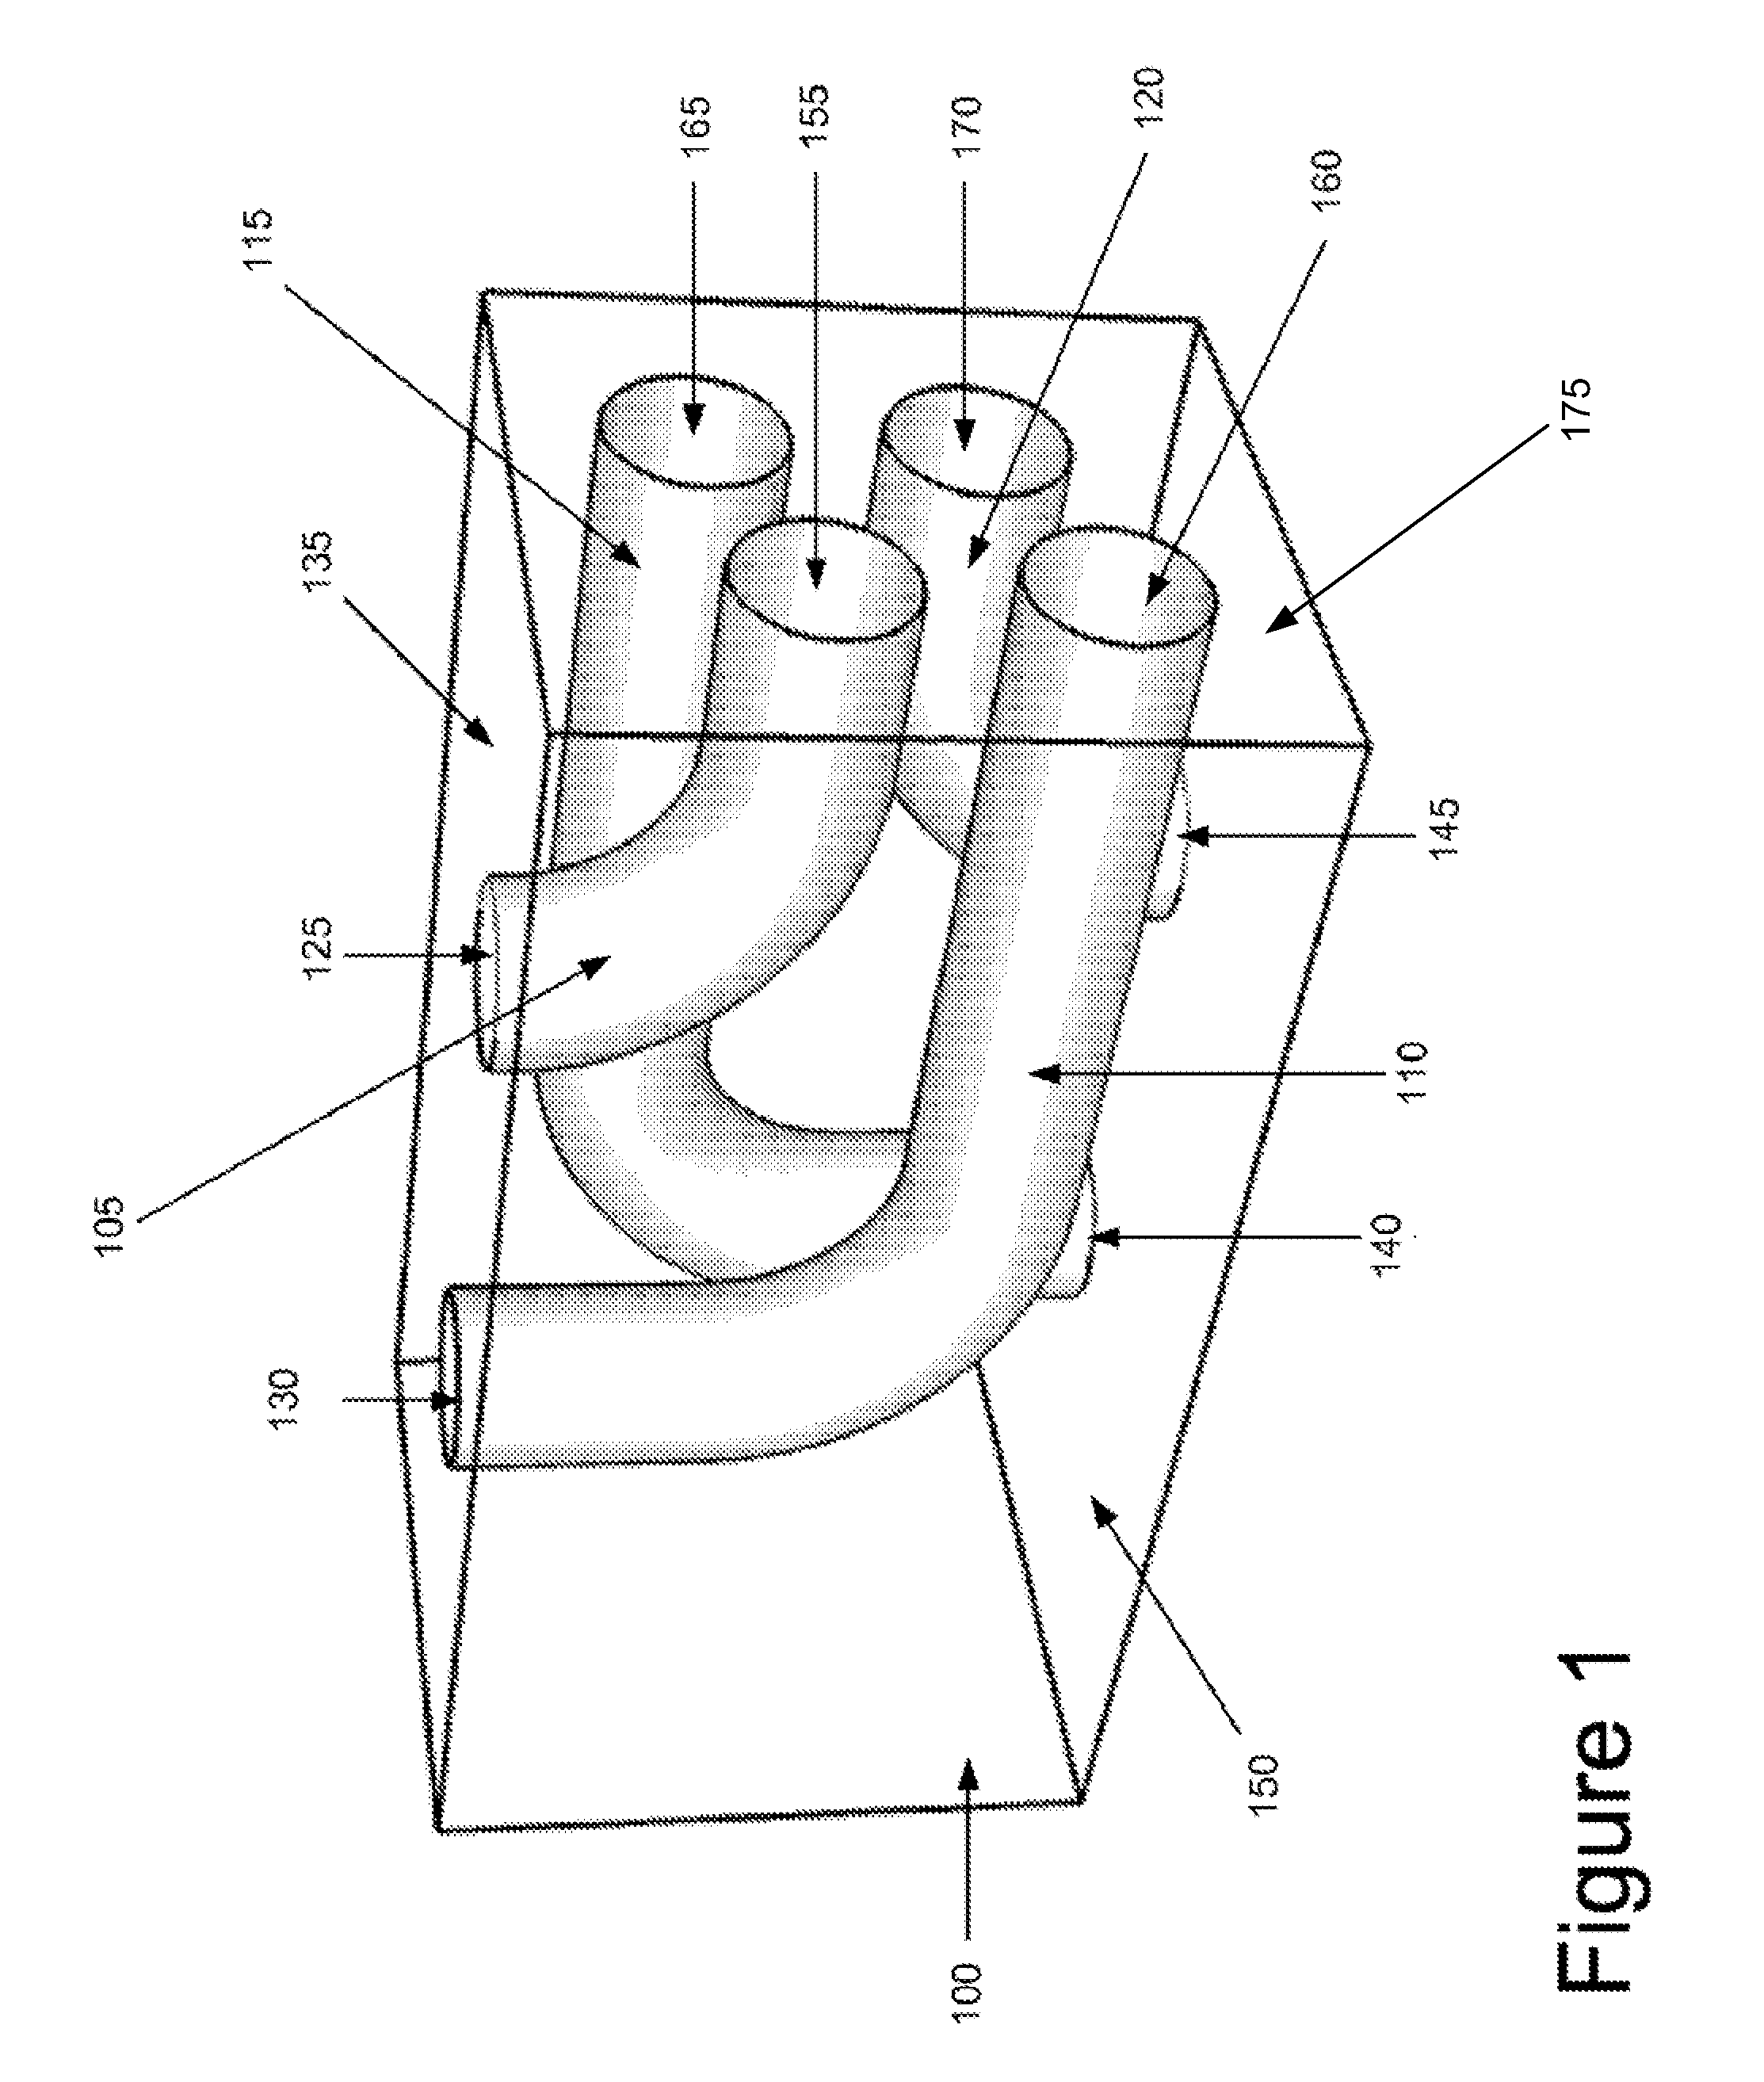 Intervertebral fusion device and method of use